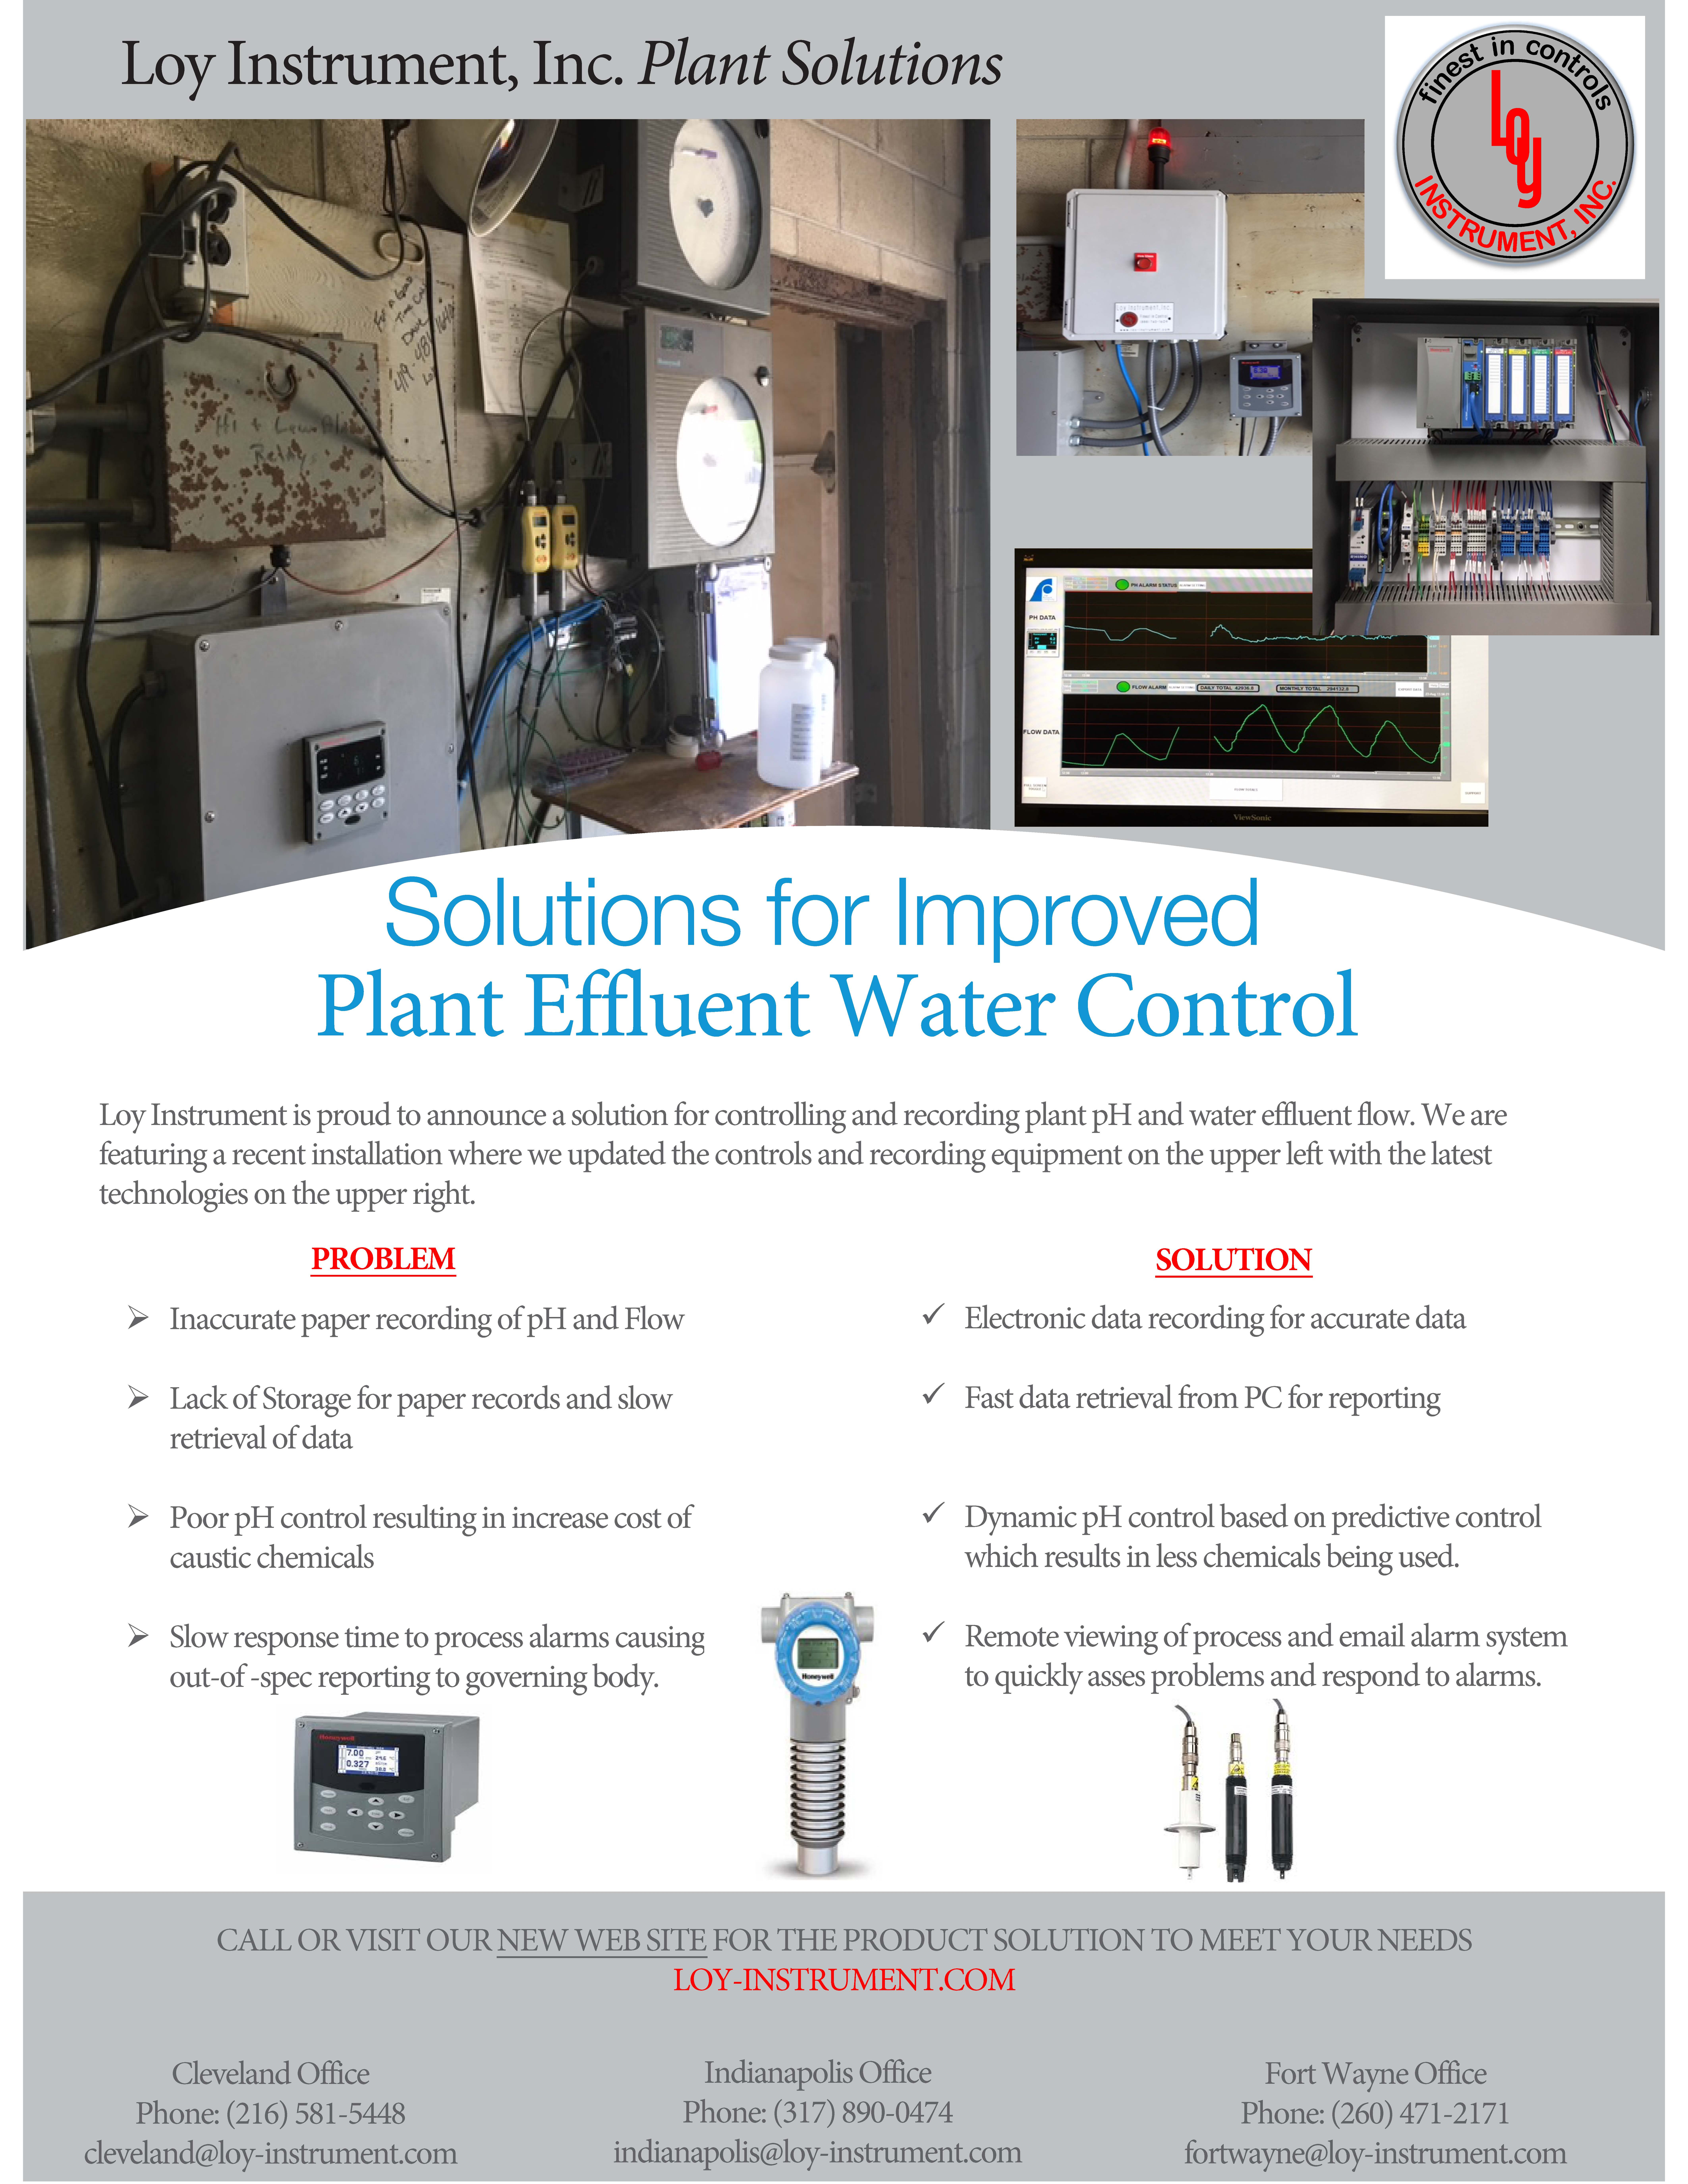 Plant Effluent Water Control Solution